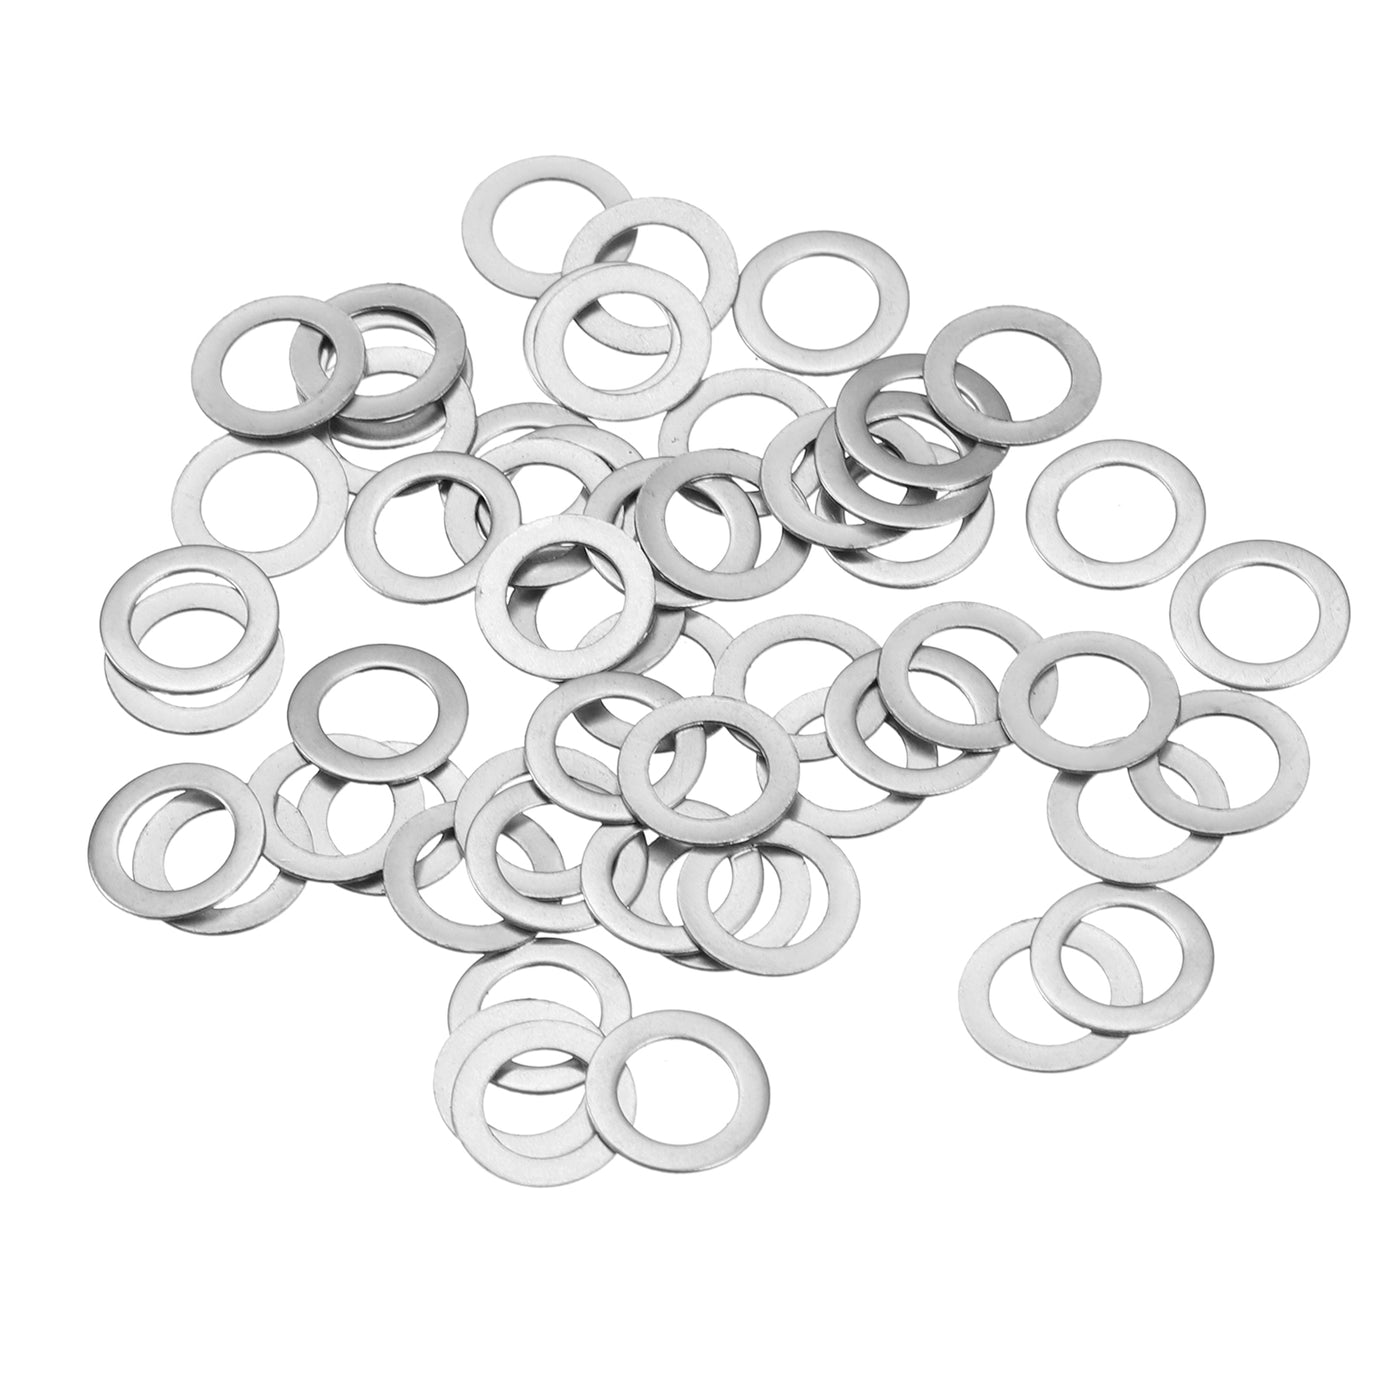 uxcell Uxcell M5 304 Stainless Steel Flat Washers, 50pcs 5x8x0.3mm Ultra Thin Flat Spacers